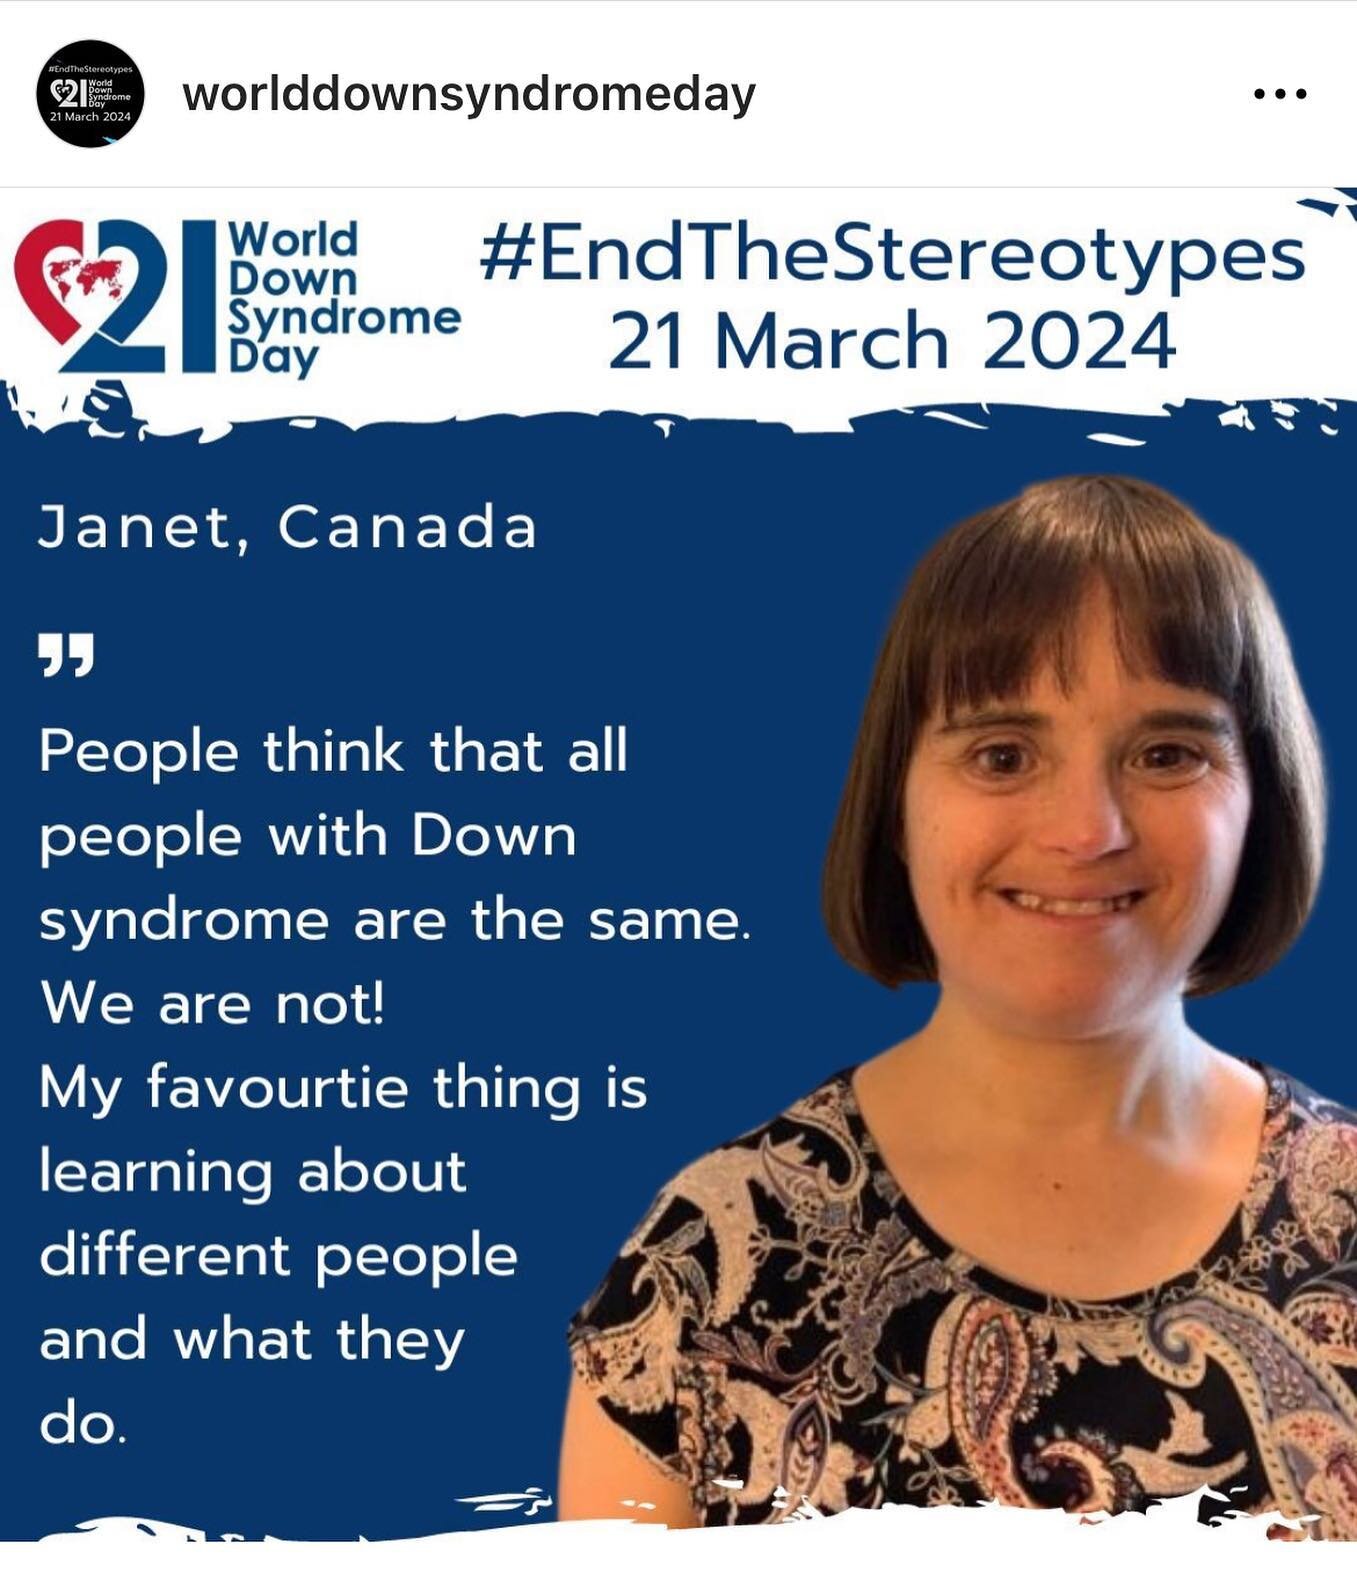 For WDSD 2024, we call for people worldwide to End The Stereotypes. 
Do you have a story to share? Post your message using the hashtag #EndTheStereotypes
Learn more at www.worlddownsyndromeday.org
#WorldDownSyndromeDay #AssumeThatICan #DownSyndromeAd